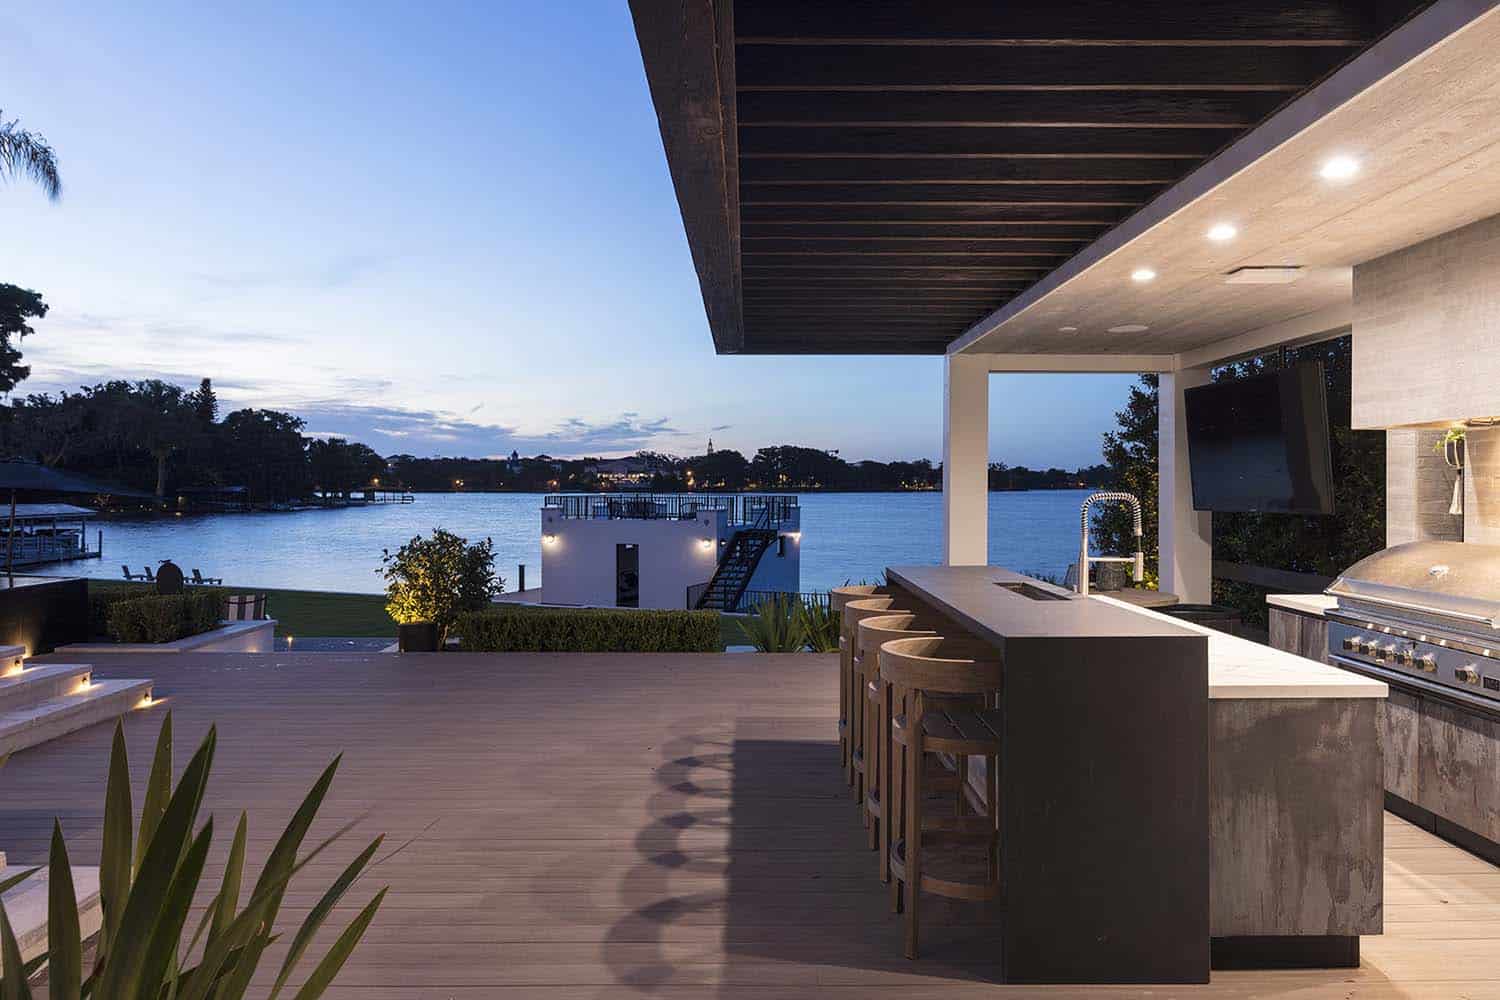 transitional style home outdoor covered patio with a kitchen and dining area at dusk